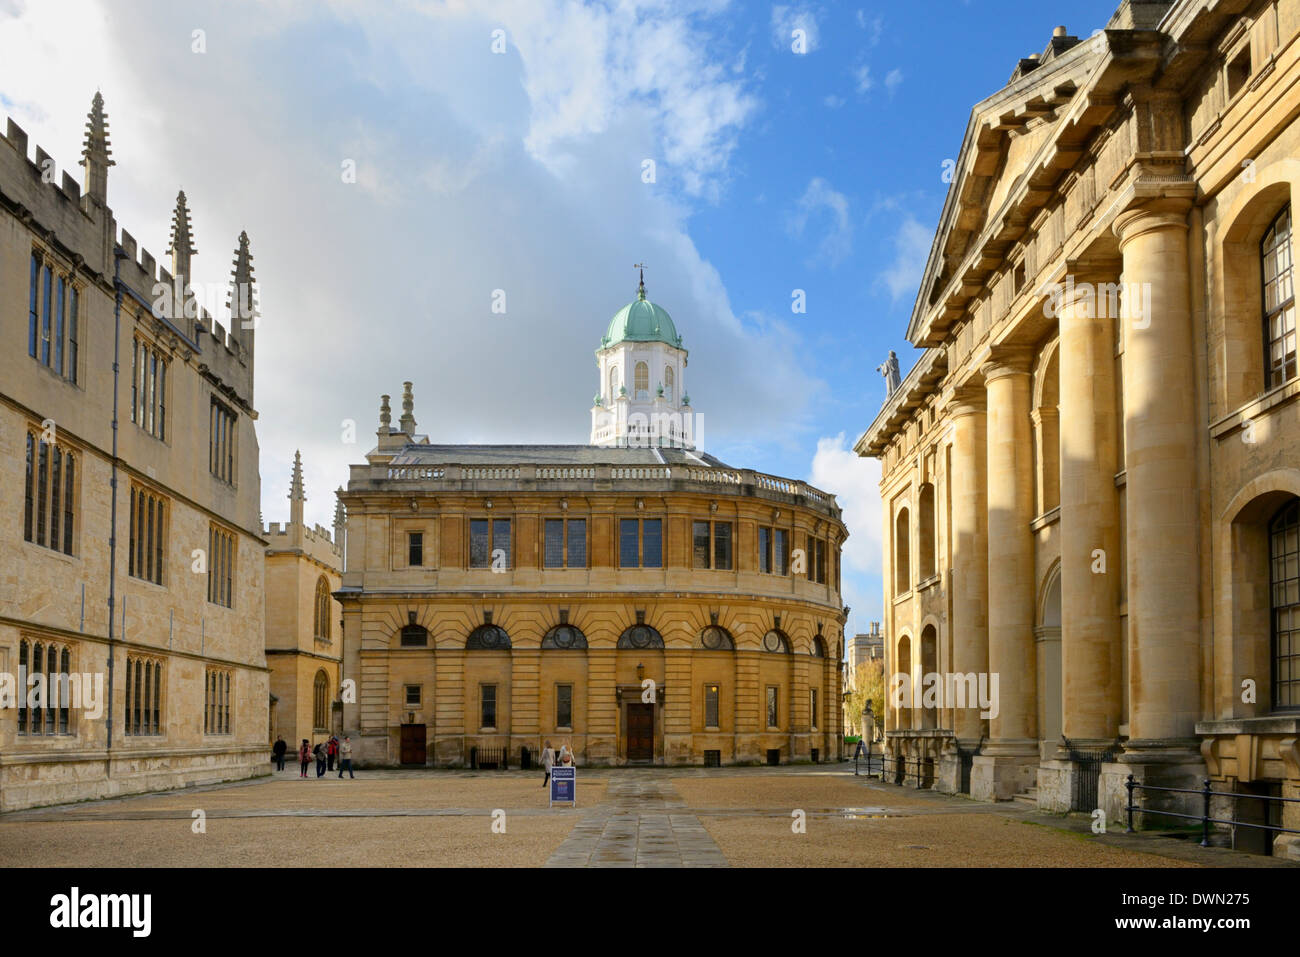 The Clarendon Building, Bodleian Library and Sheldonian Theatre, Oxford, Oxfordshire, England, United Kingdom, Europe Stock Photo